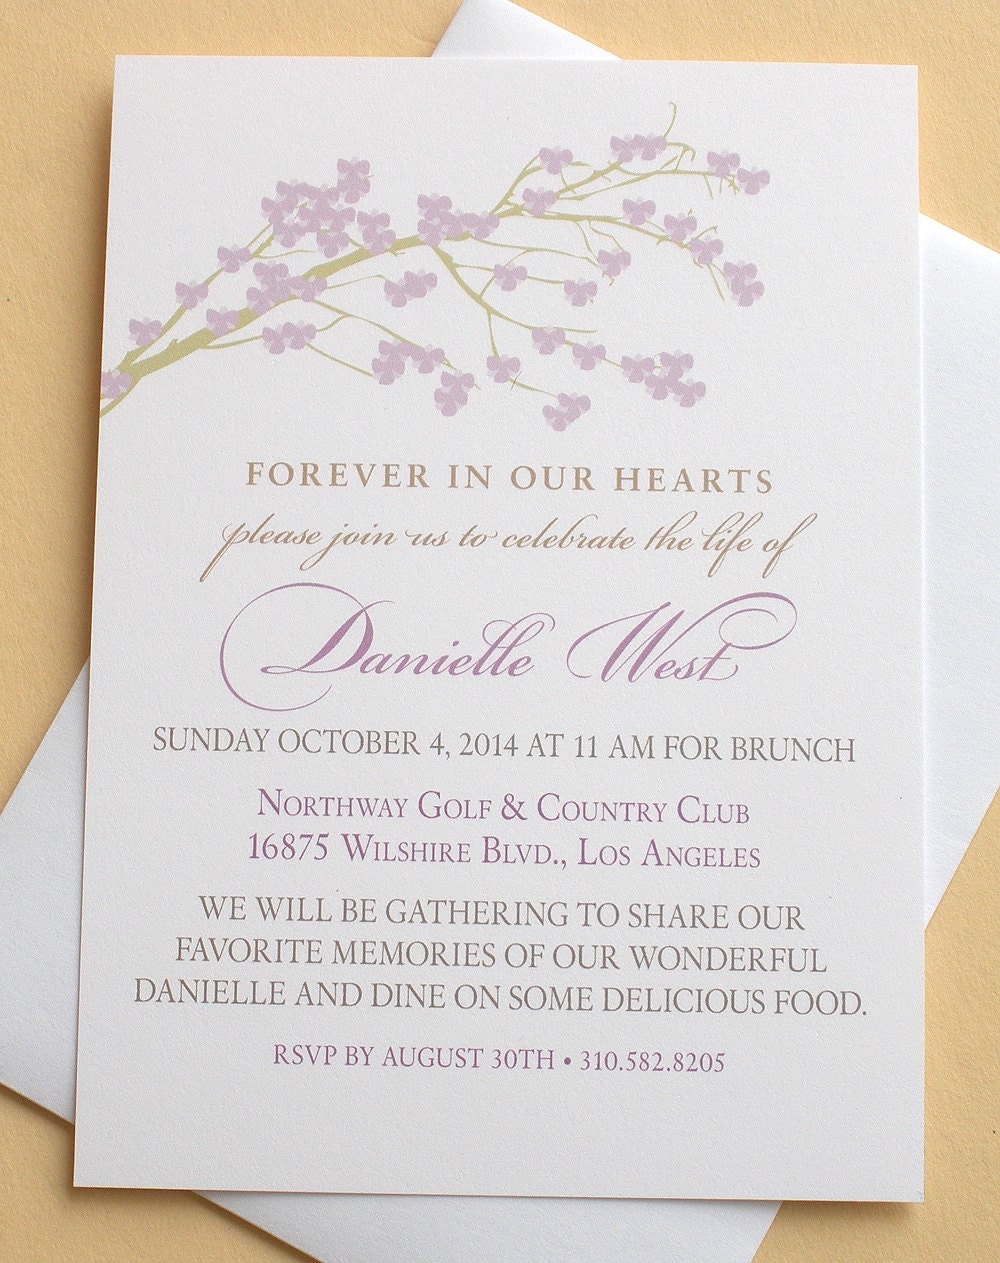 Celebration of Life Invitations with a Branch of by zdesigns0107